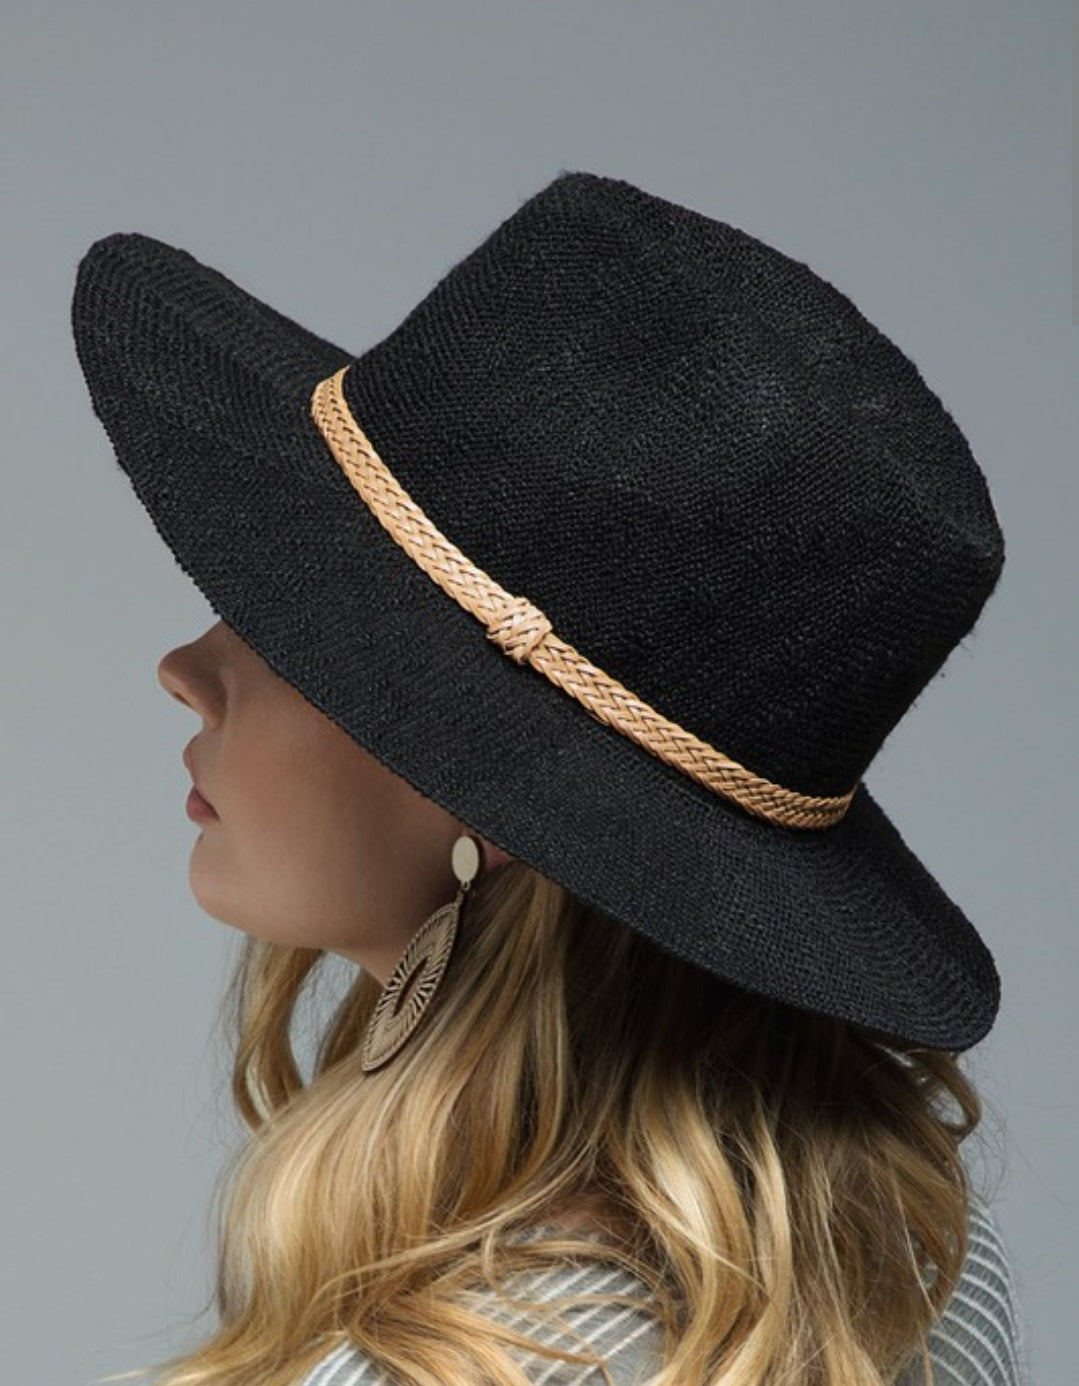 Black panama hat with braided leather band * on sale